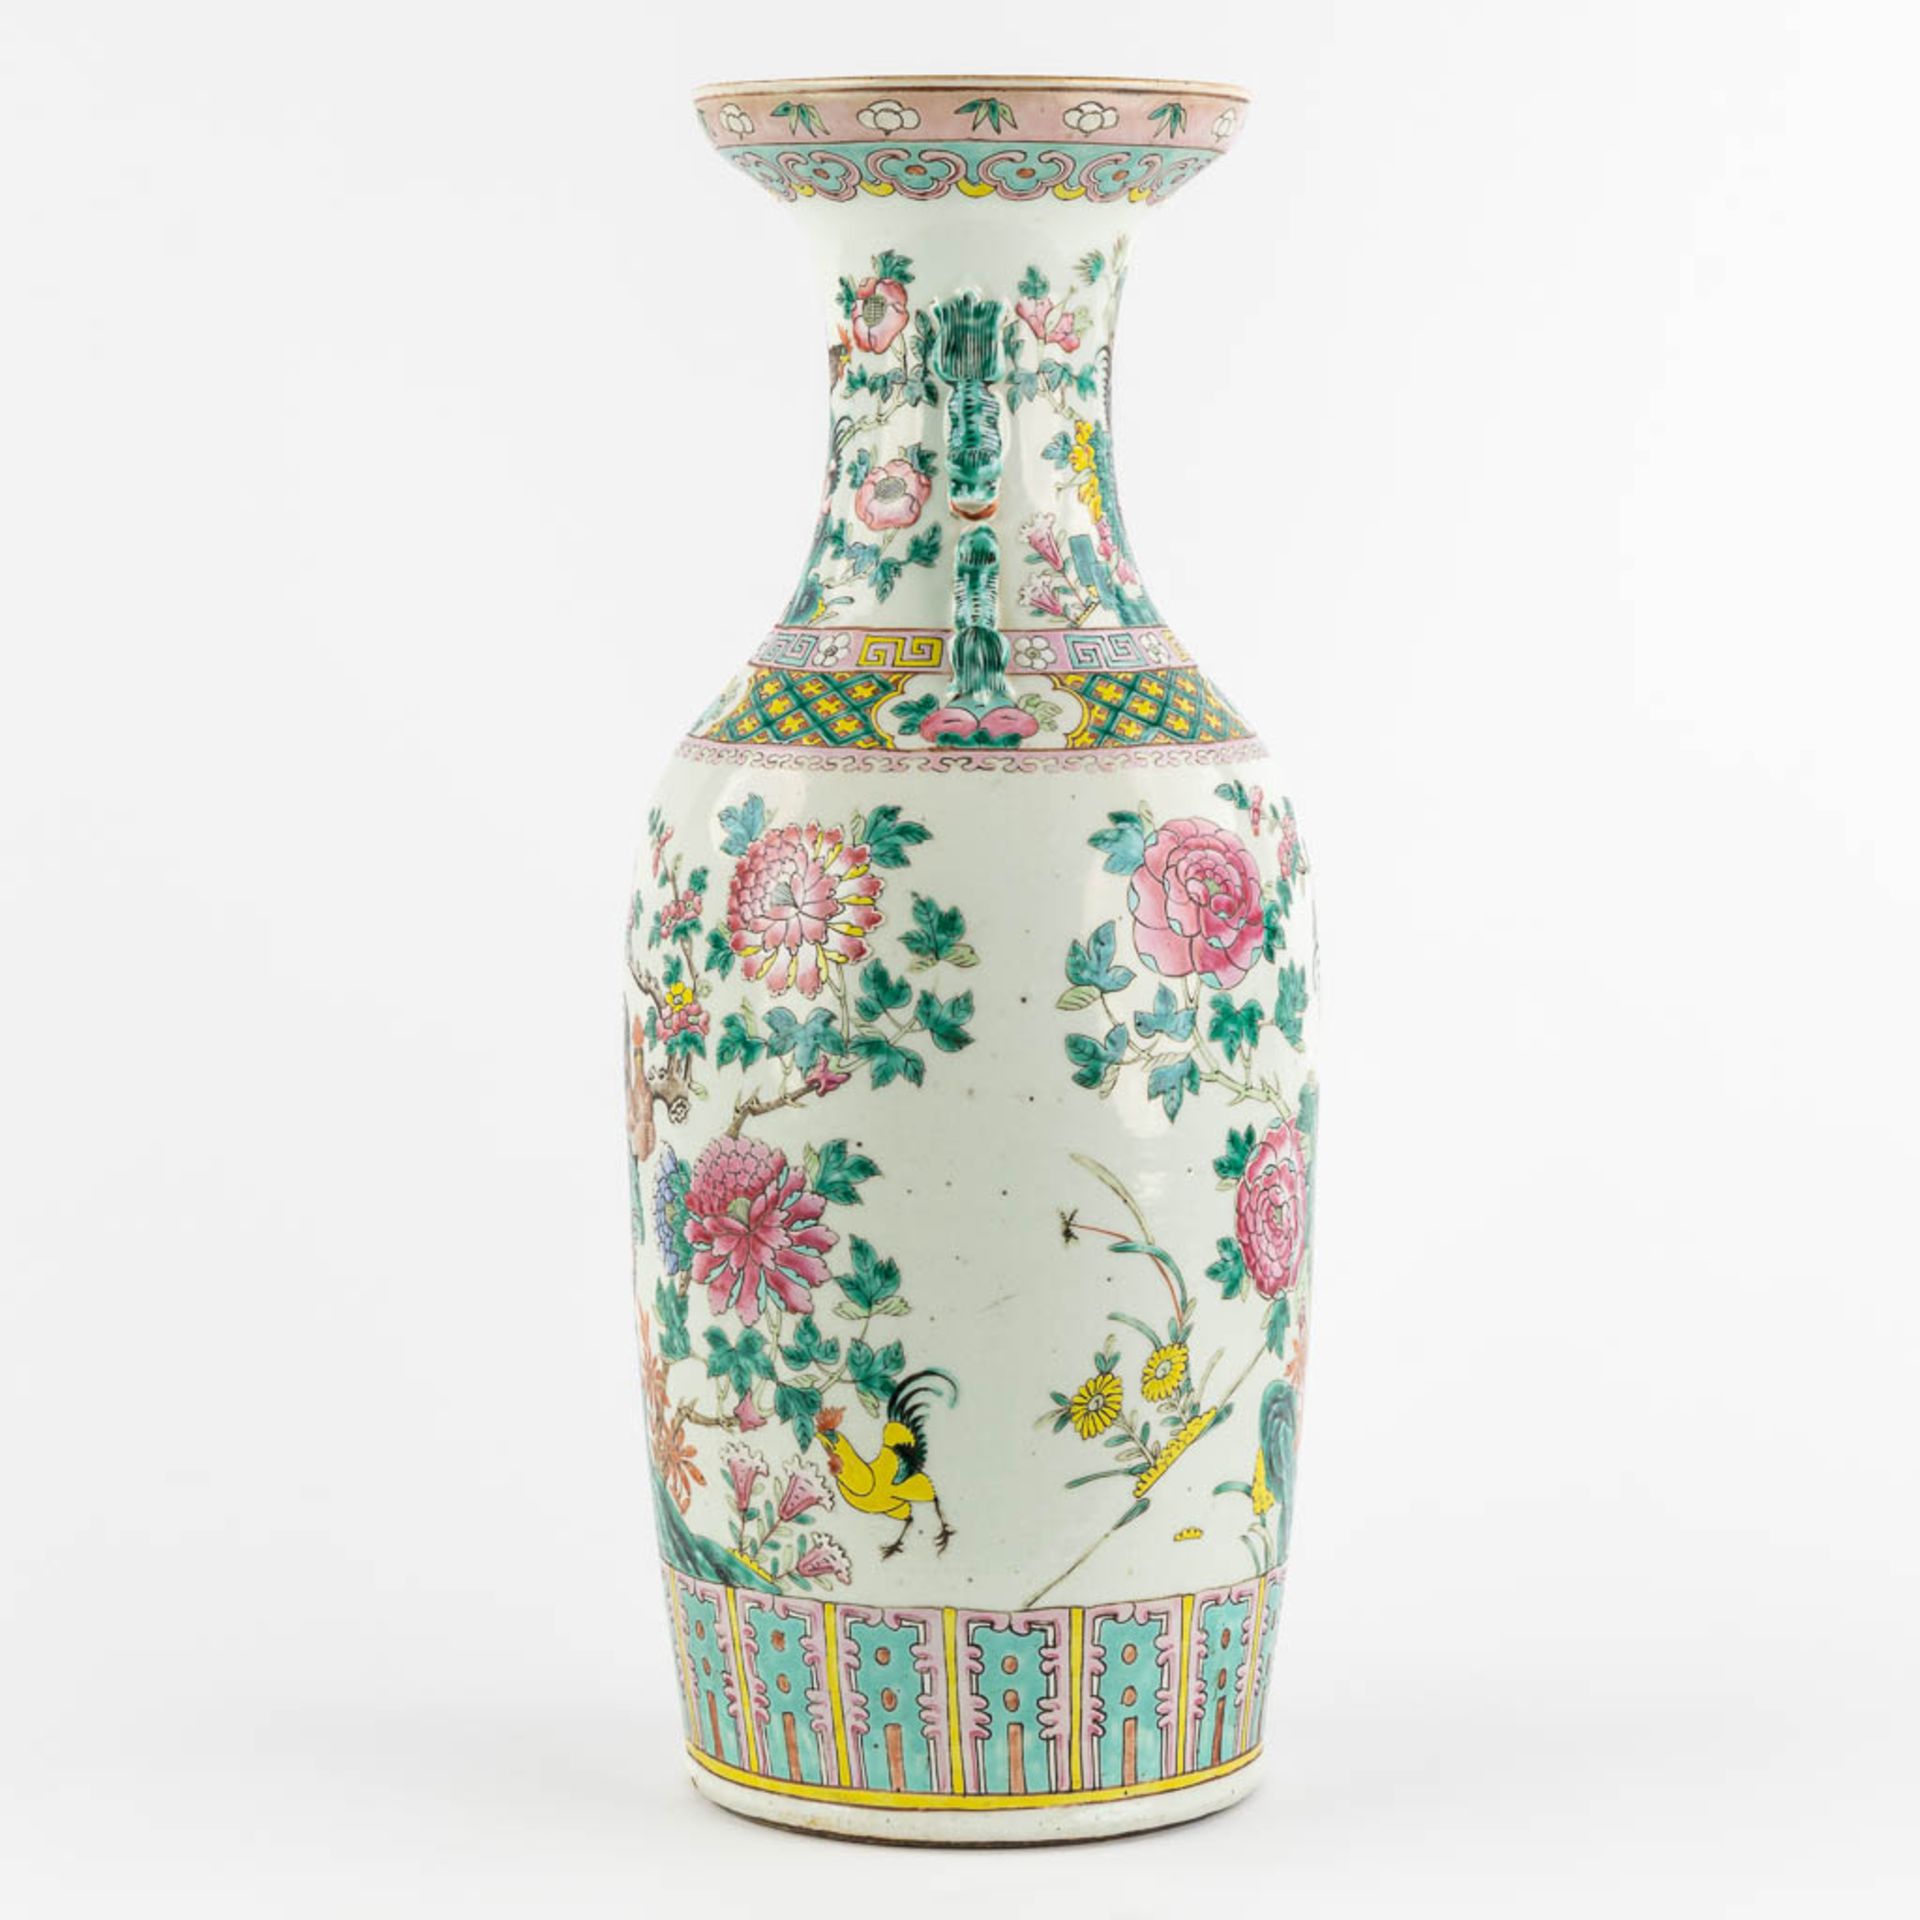 A large Chinese Famille Rose vase decorated with Chicken and Flora. (H:59 x D:23 cm) - Image 6 of 11